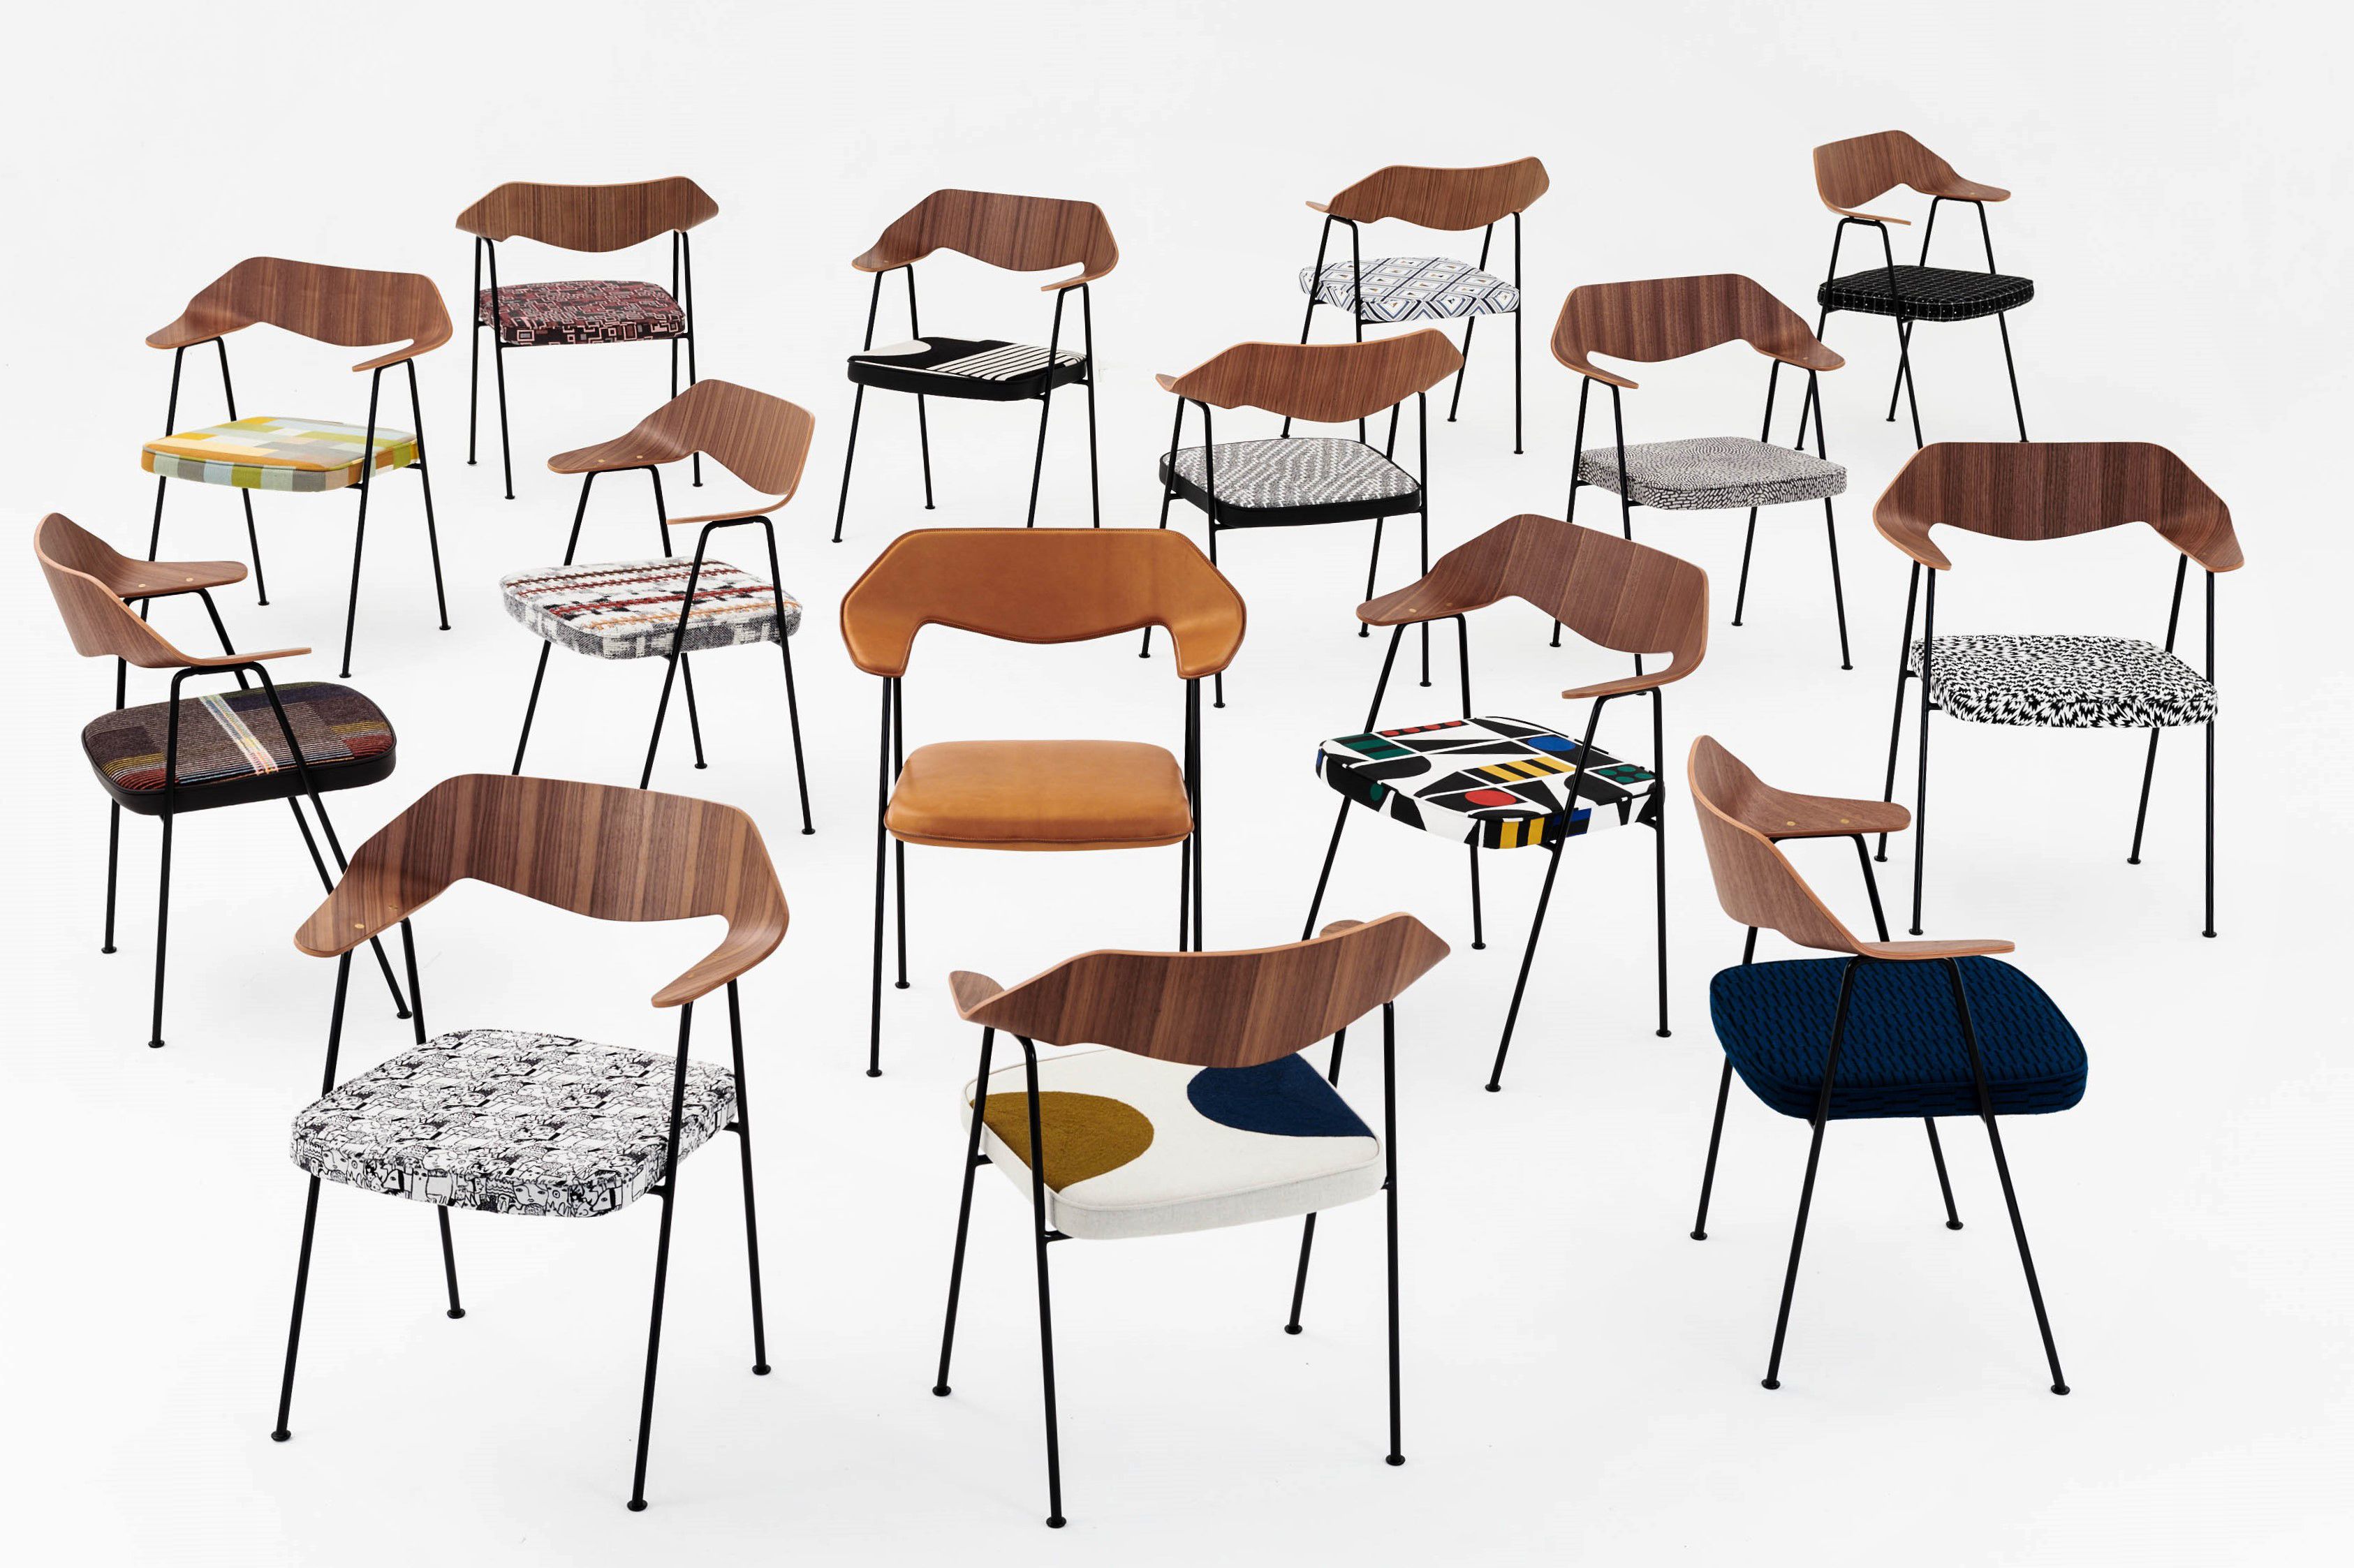 15 new versions of Robin Day's '675' chair, one exciting auction…